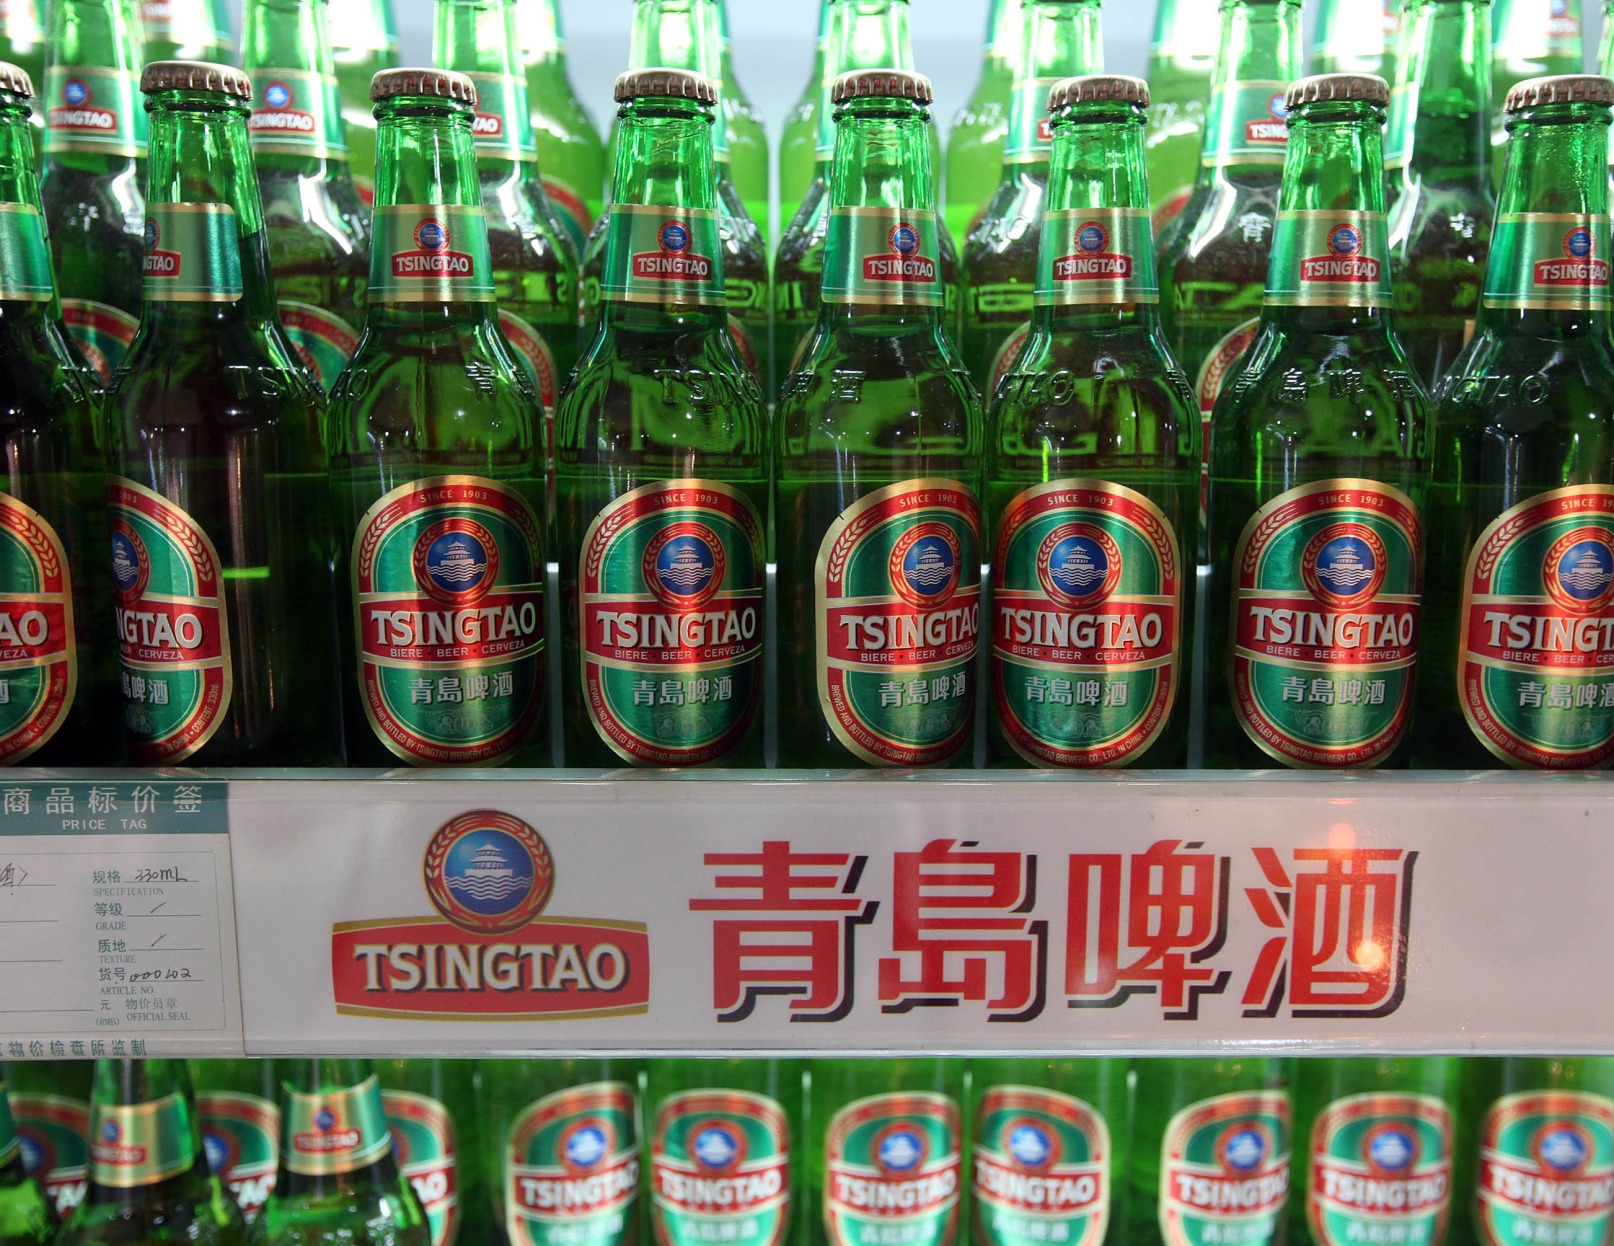 Bottles of Tsingtao beer are for sale at the Tsingtao Brewery Co. museum in Qingdao, China, on Monday, Aug. 16, 2010.